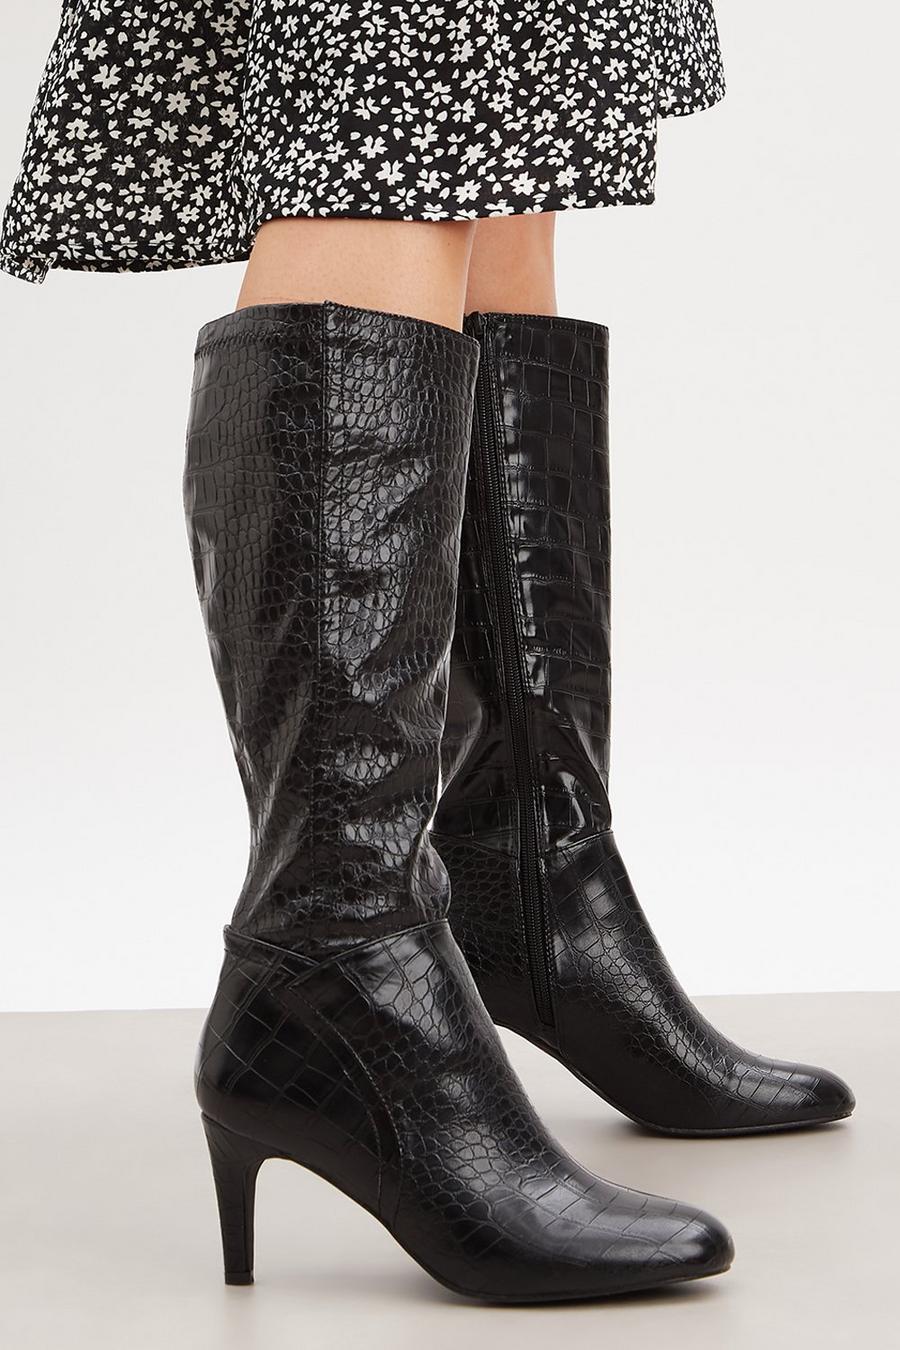 Good For The Sole: Kris Comfort High Leg Boots